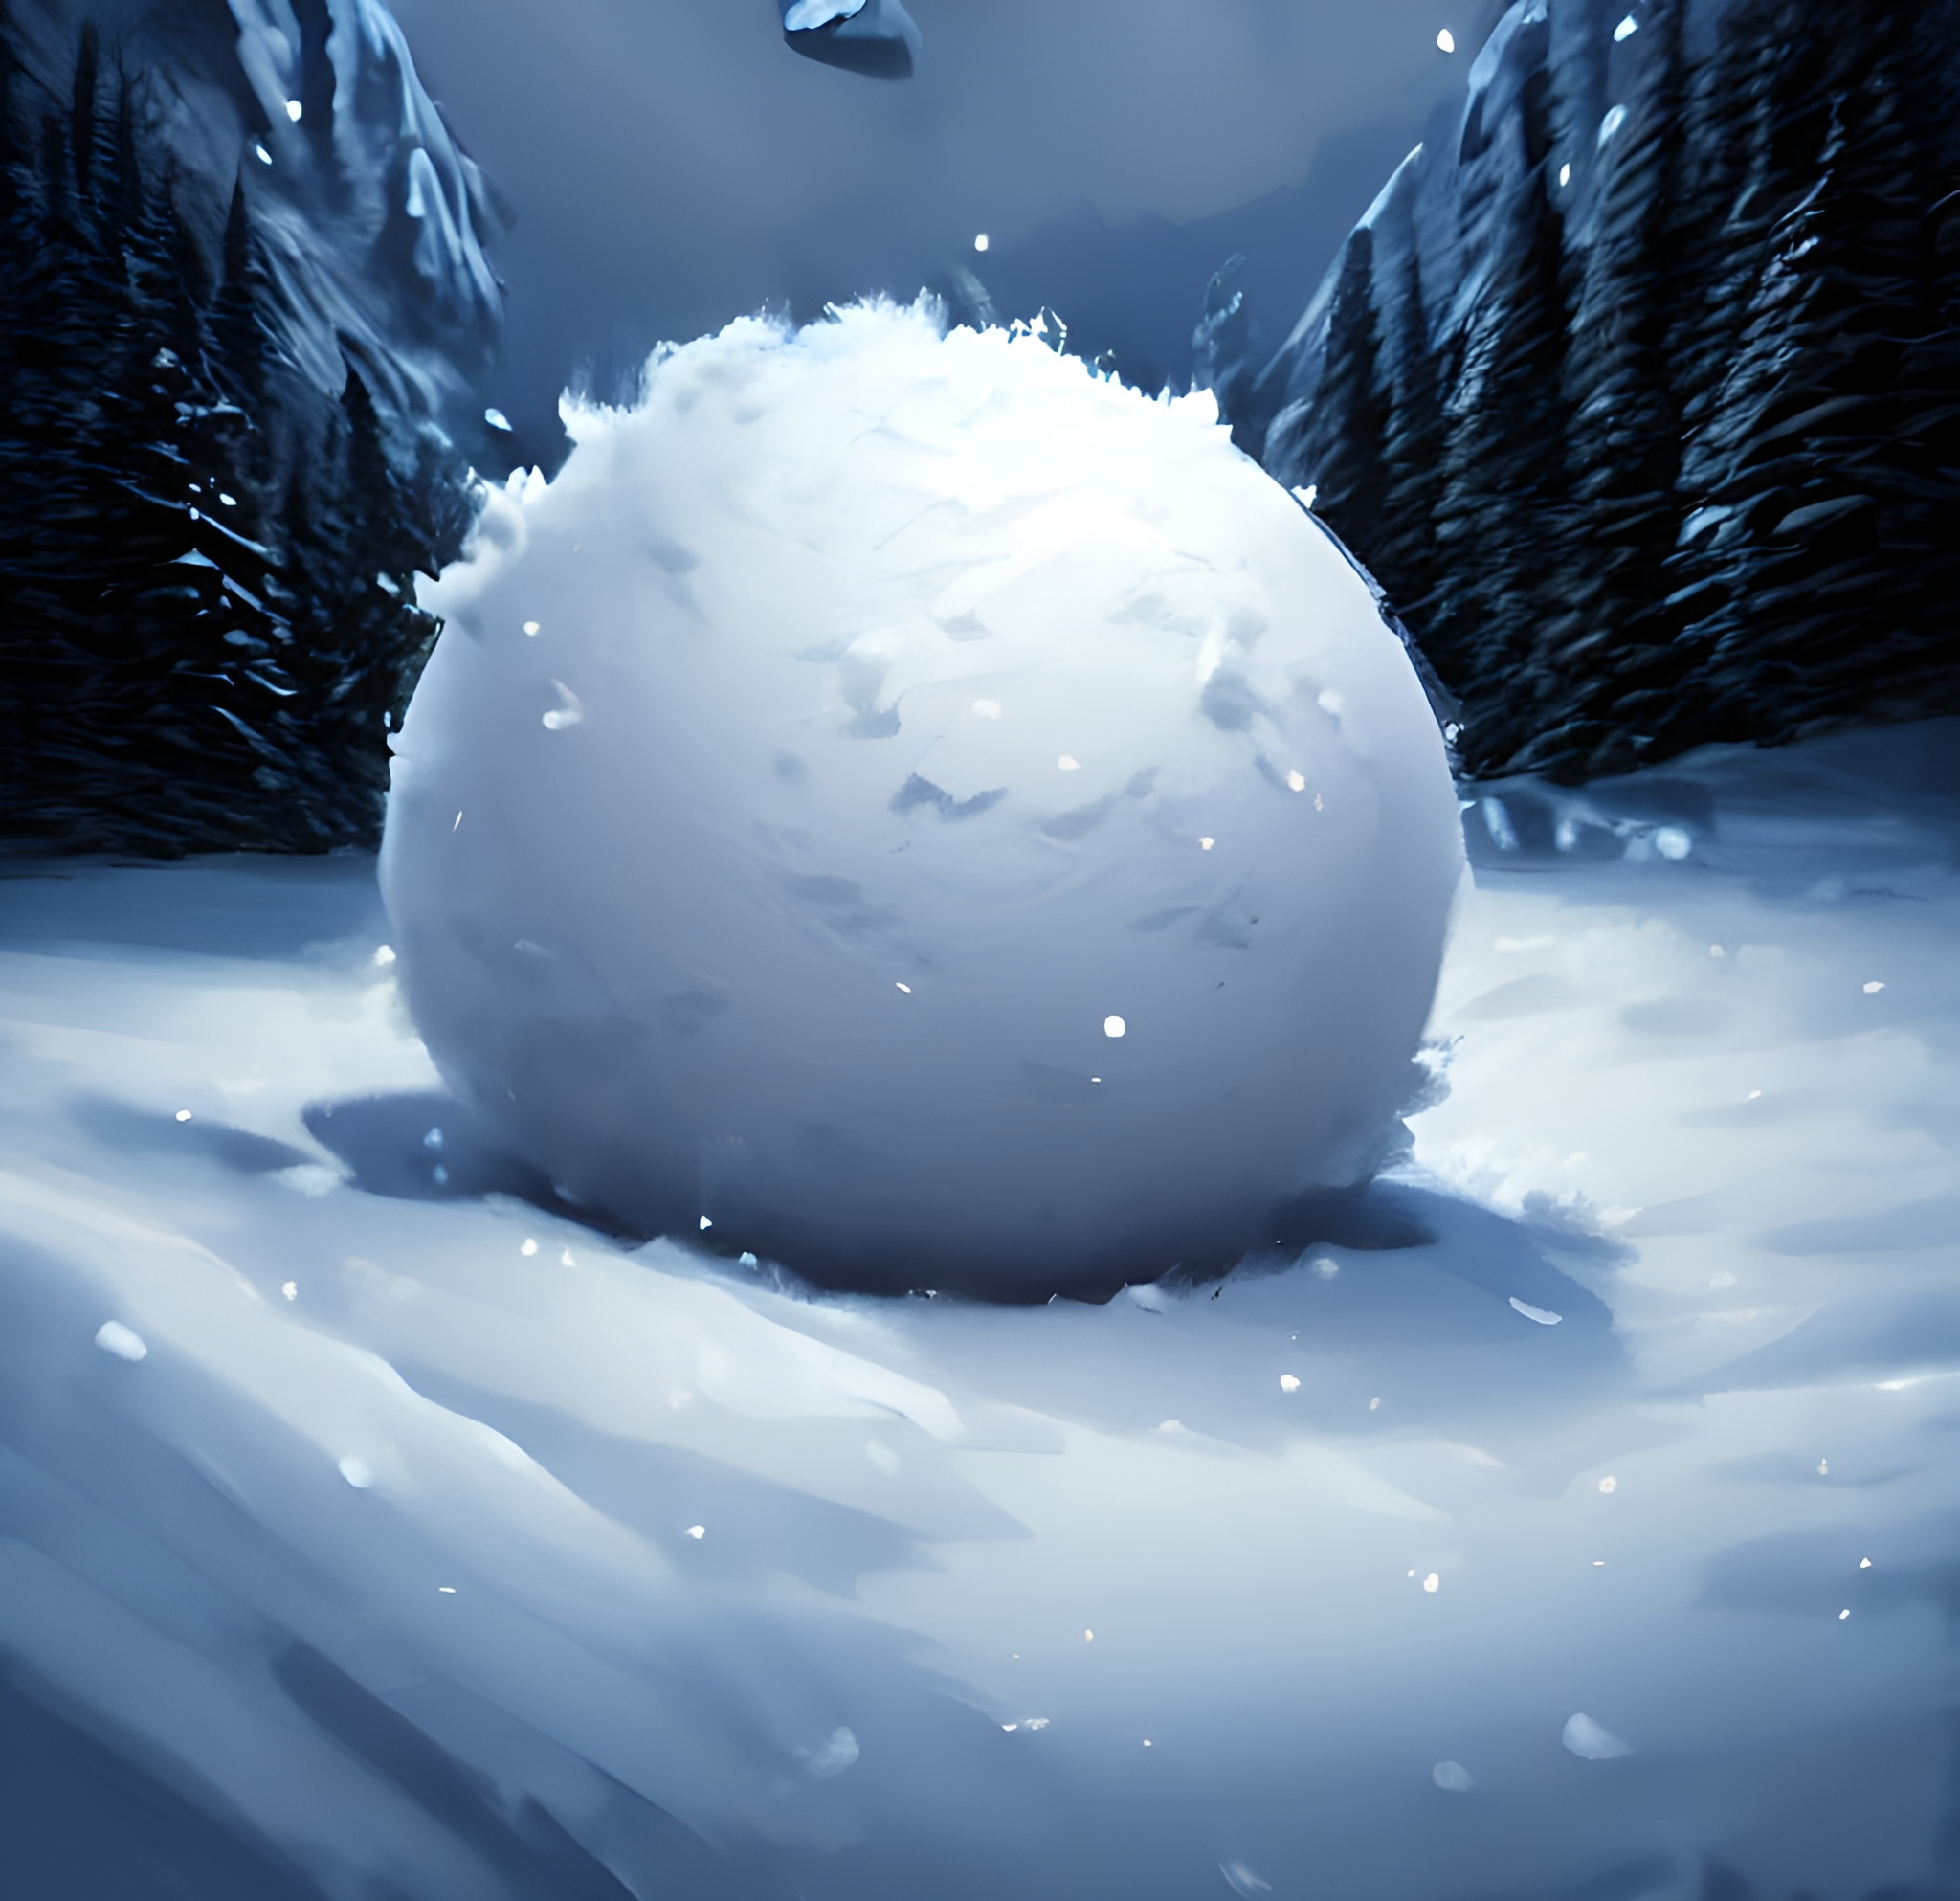 A large snowball rolling down a hill.